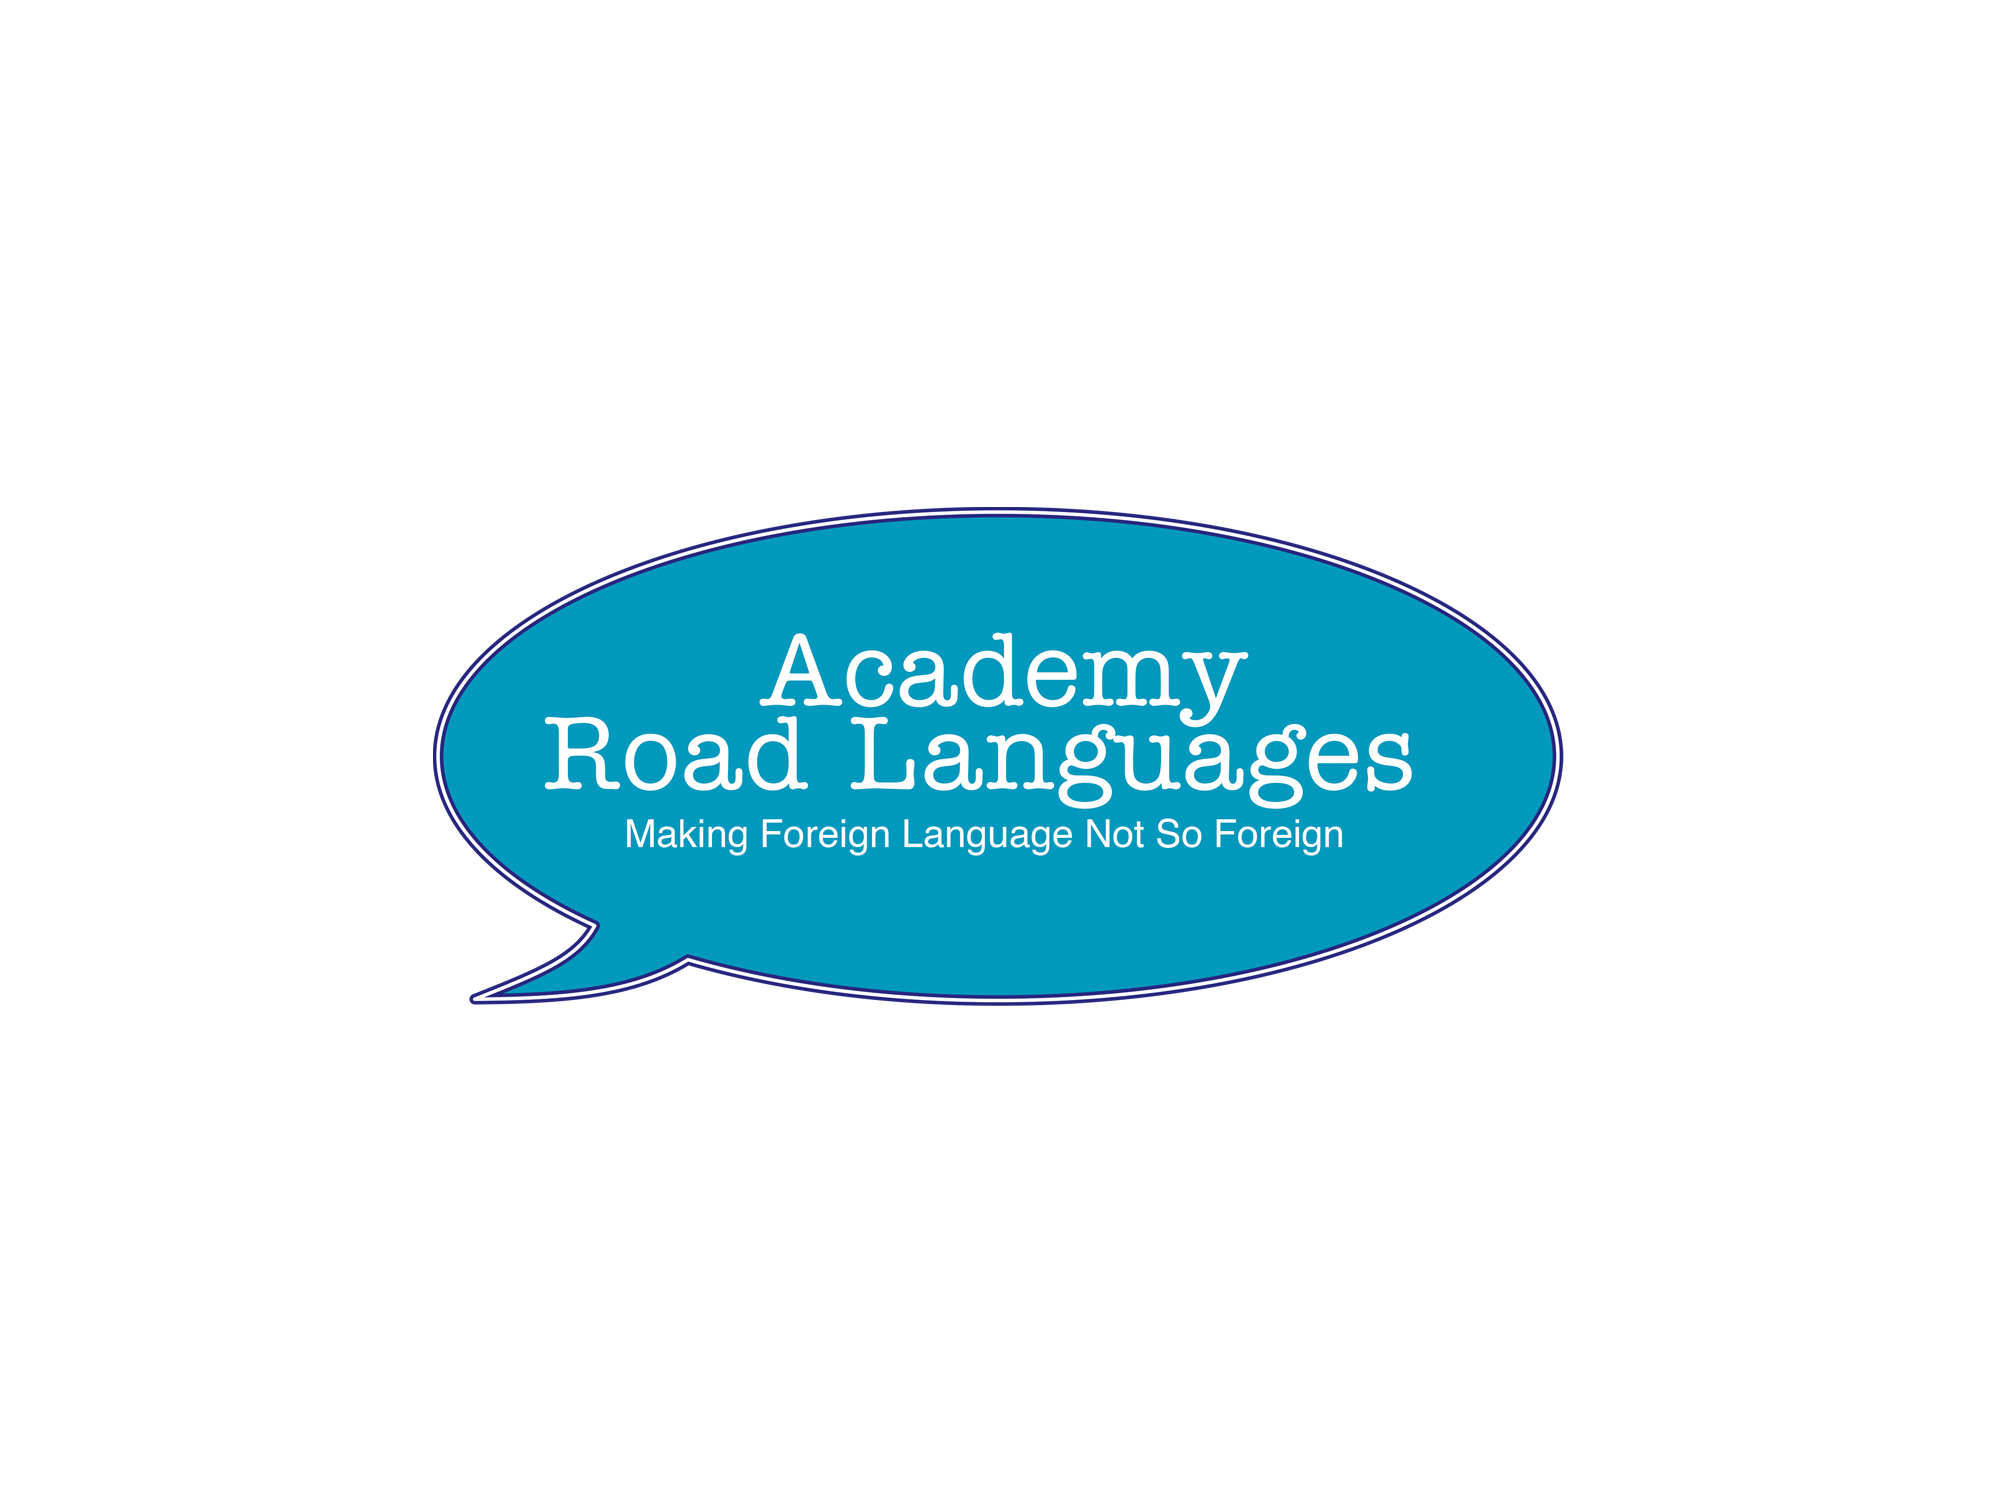 Academy Road Languages, 2014.